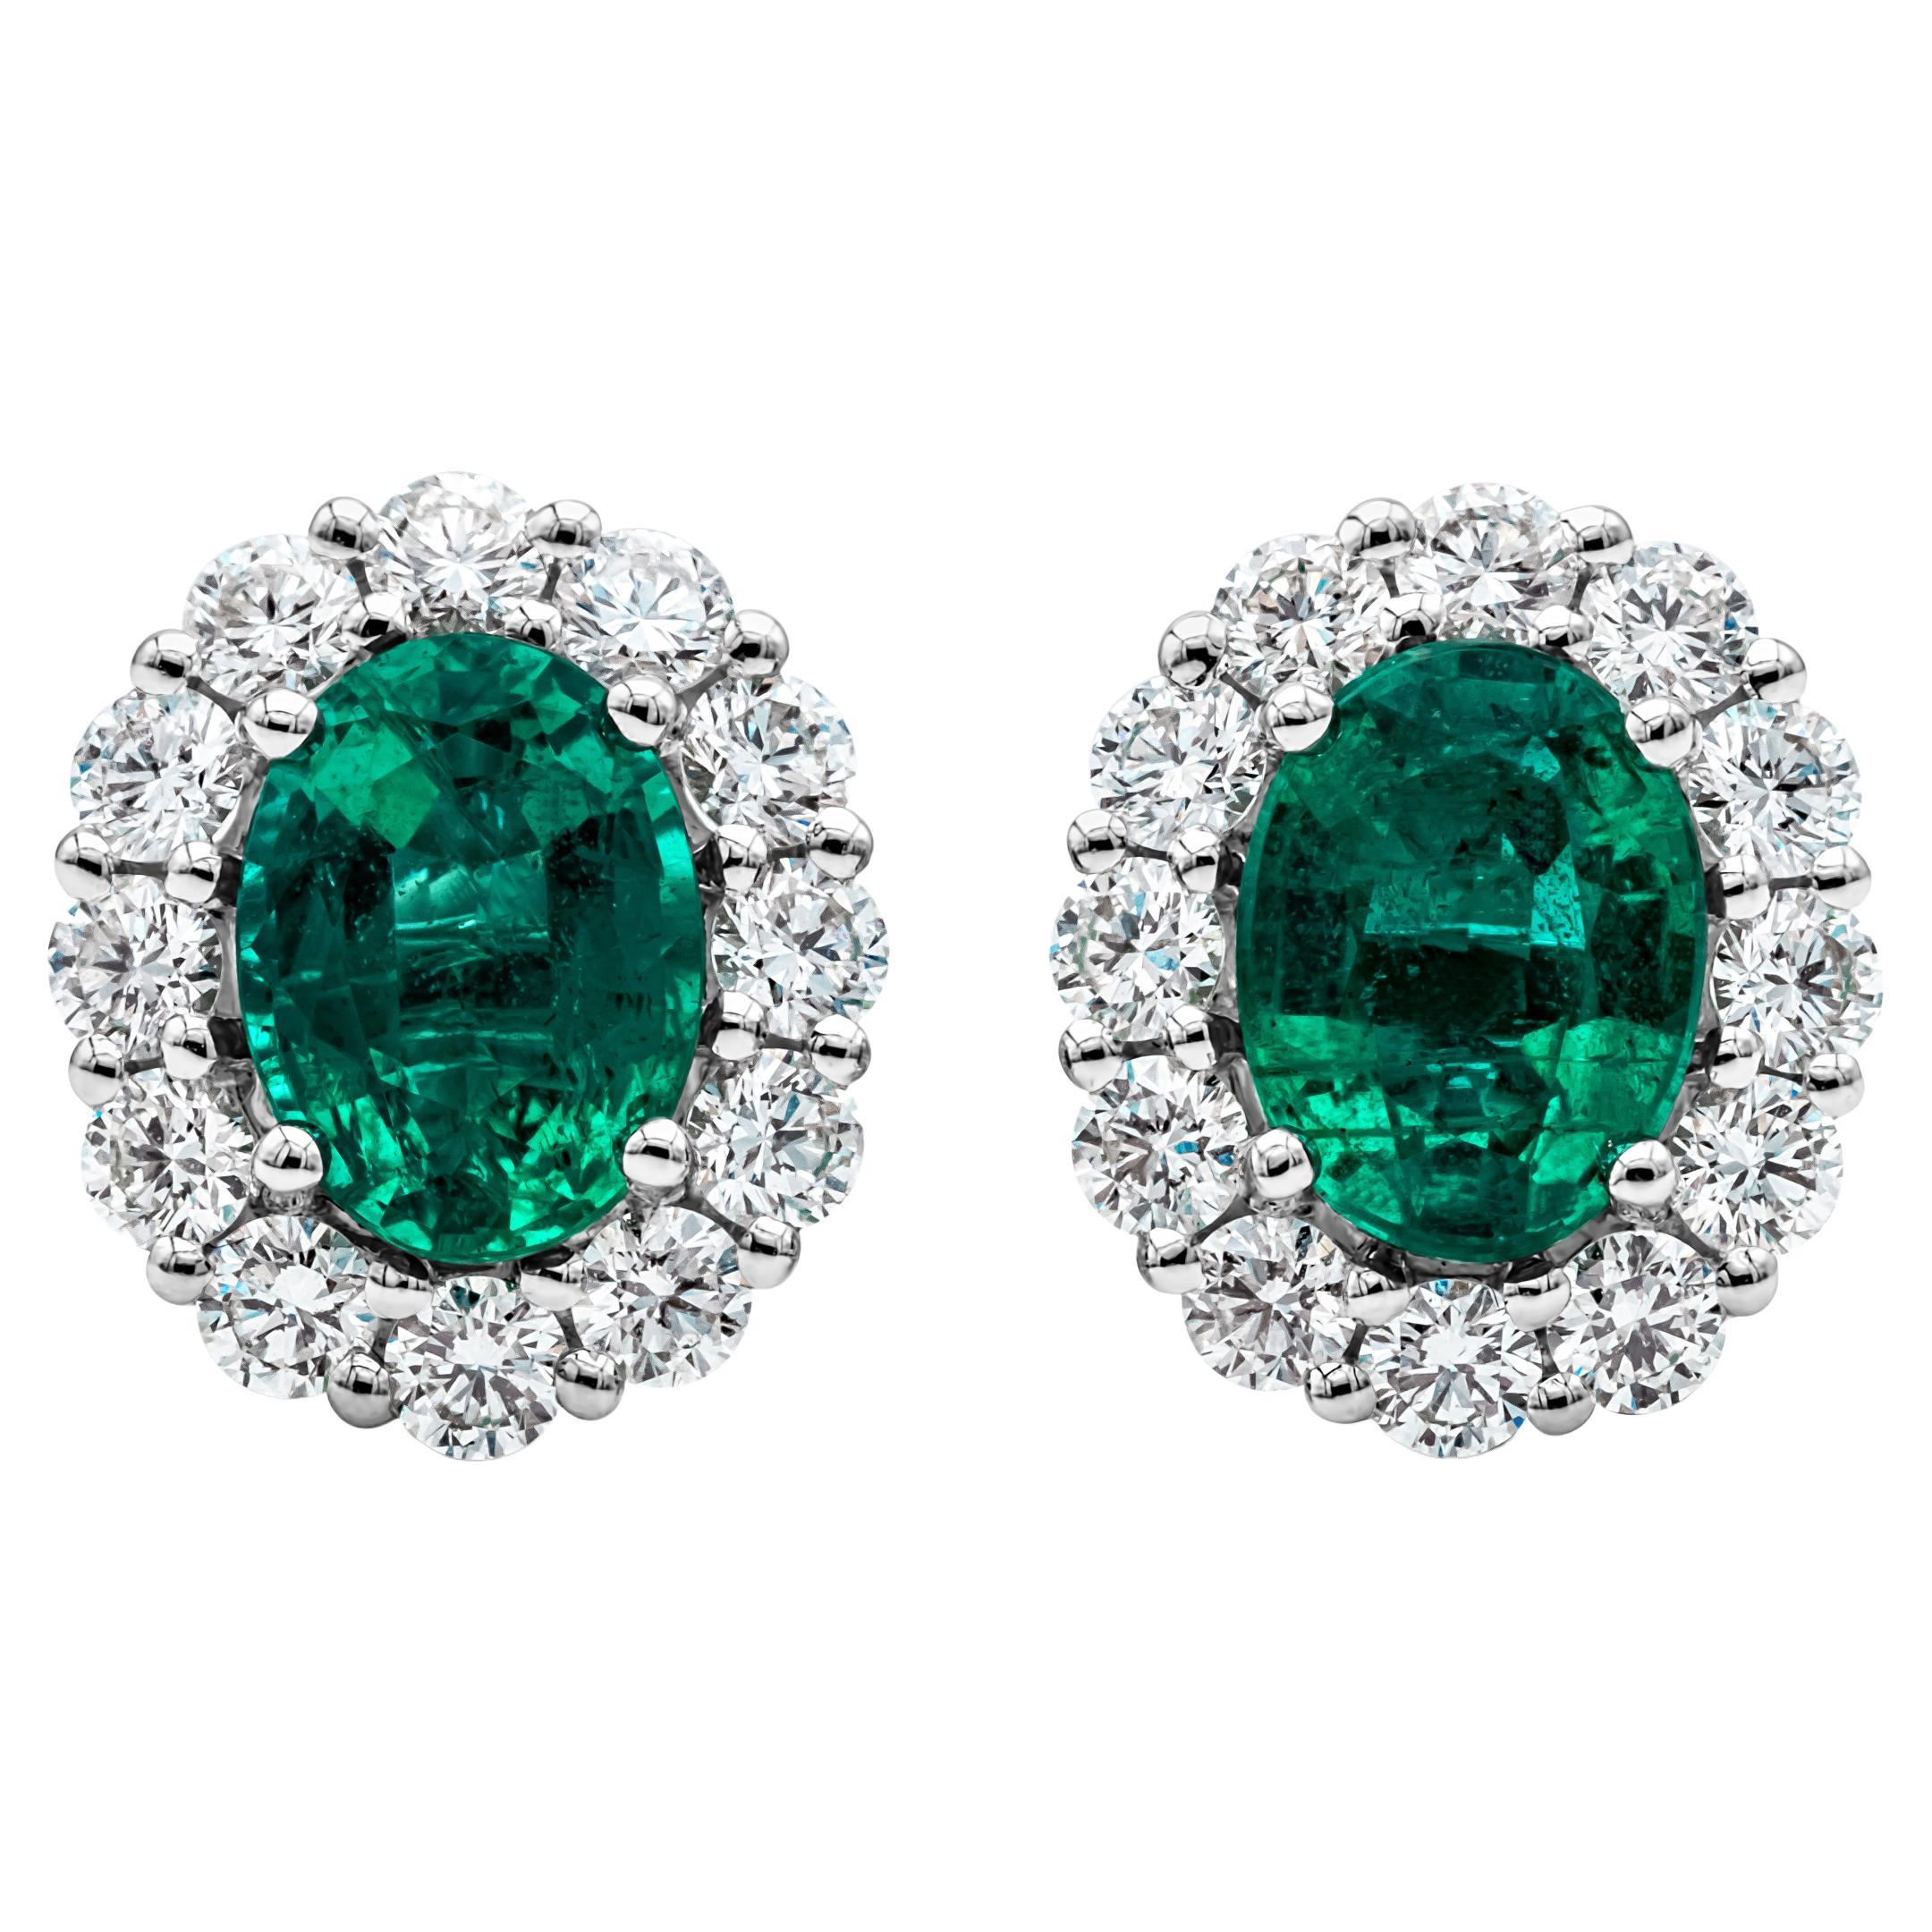 2.18 Carats Total Oval Cut Green Emerald and Diamond Halo Stud Earrings